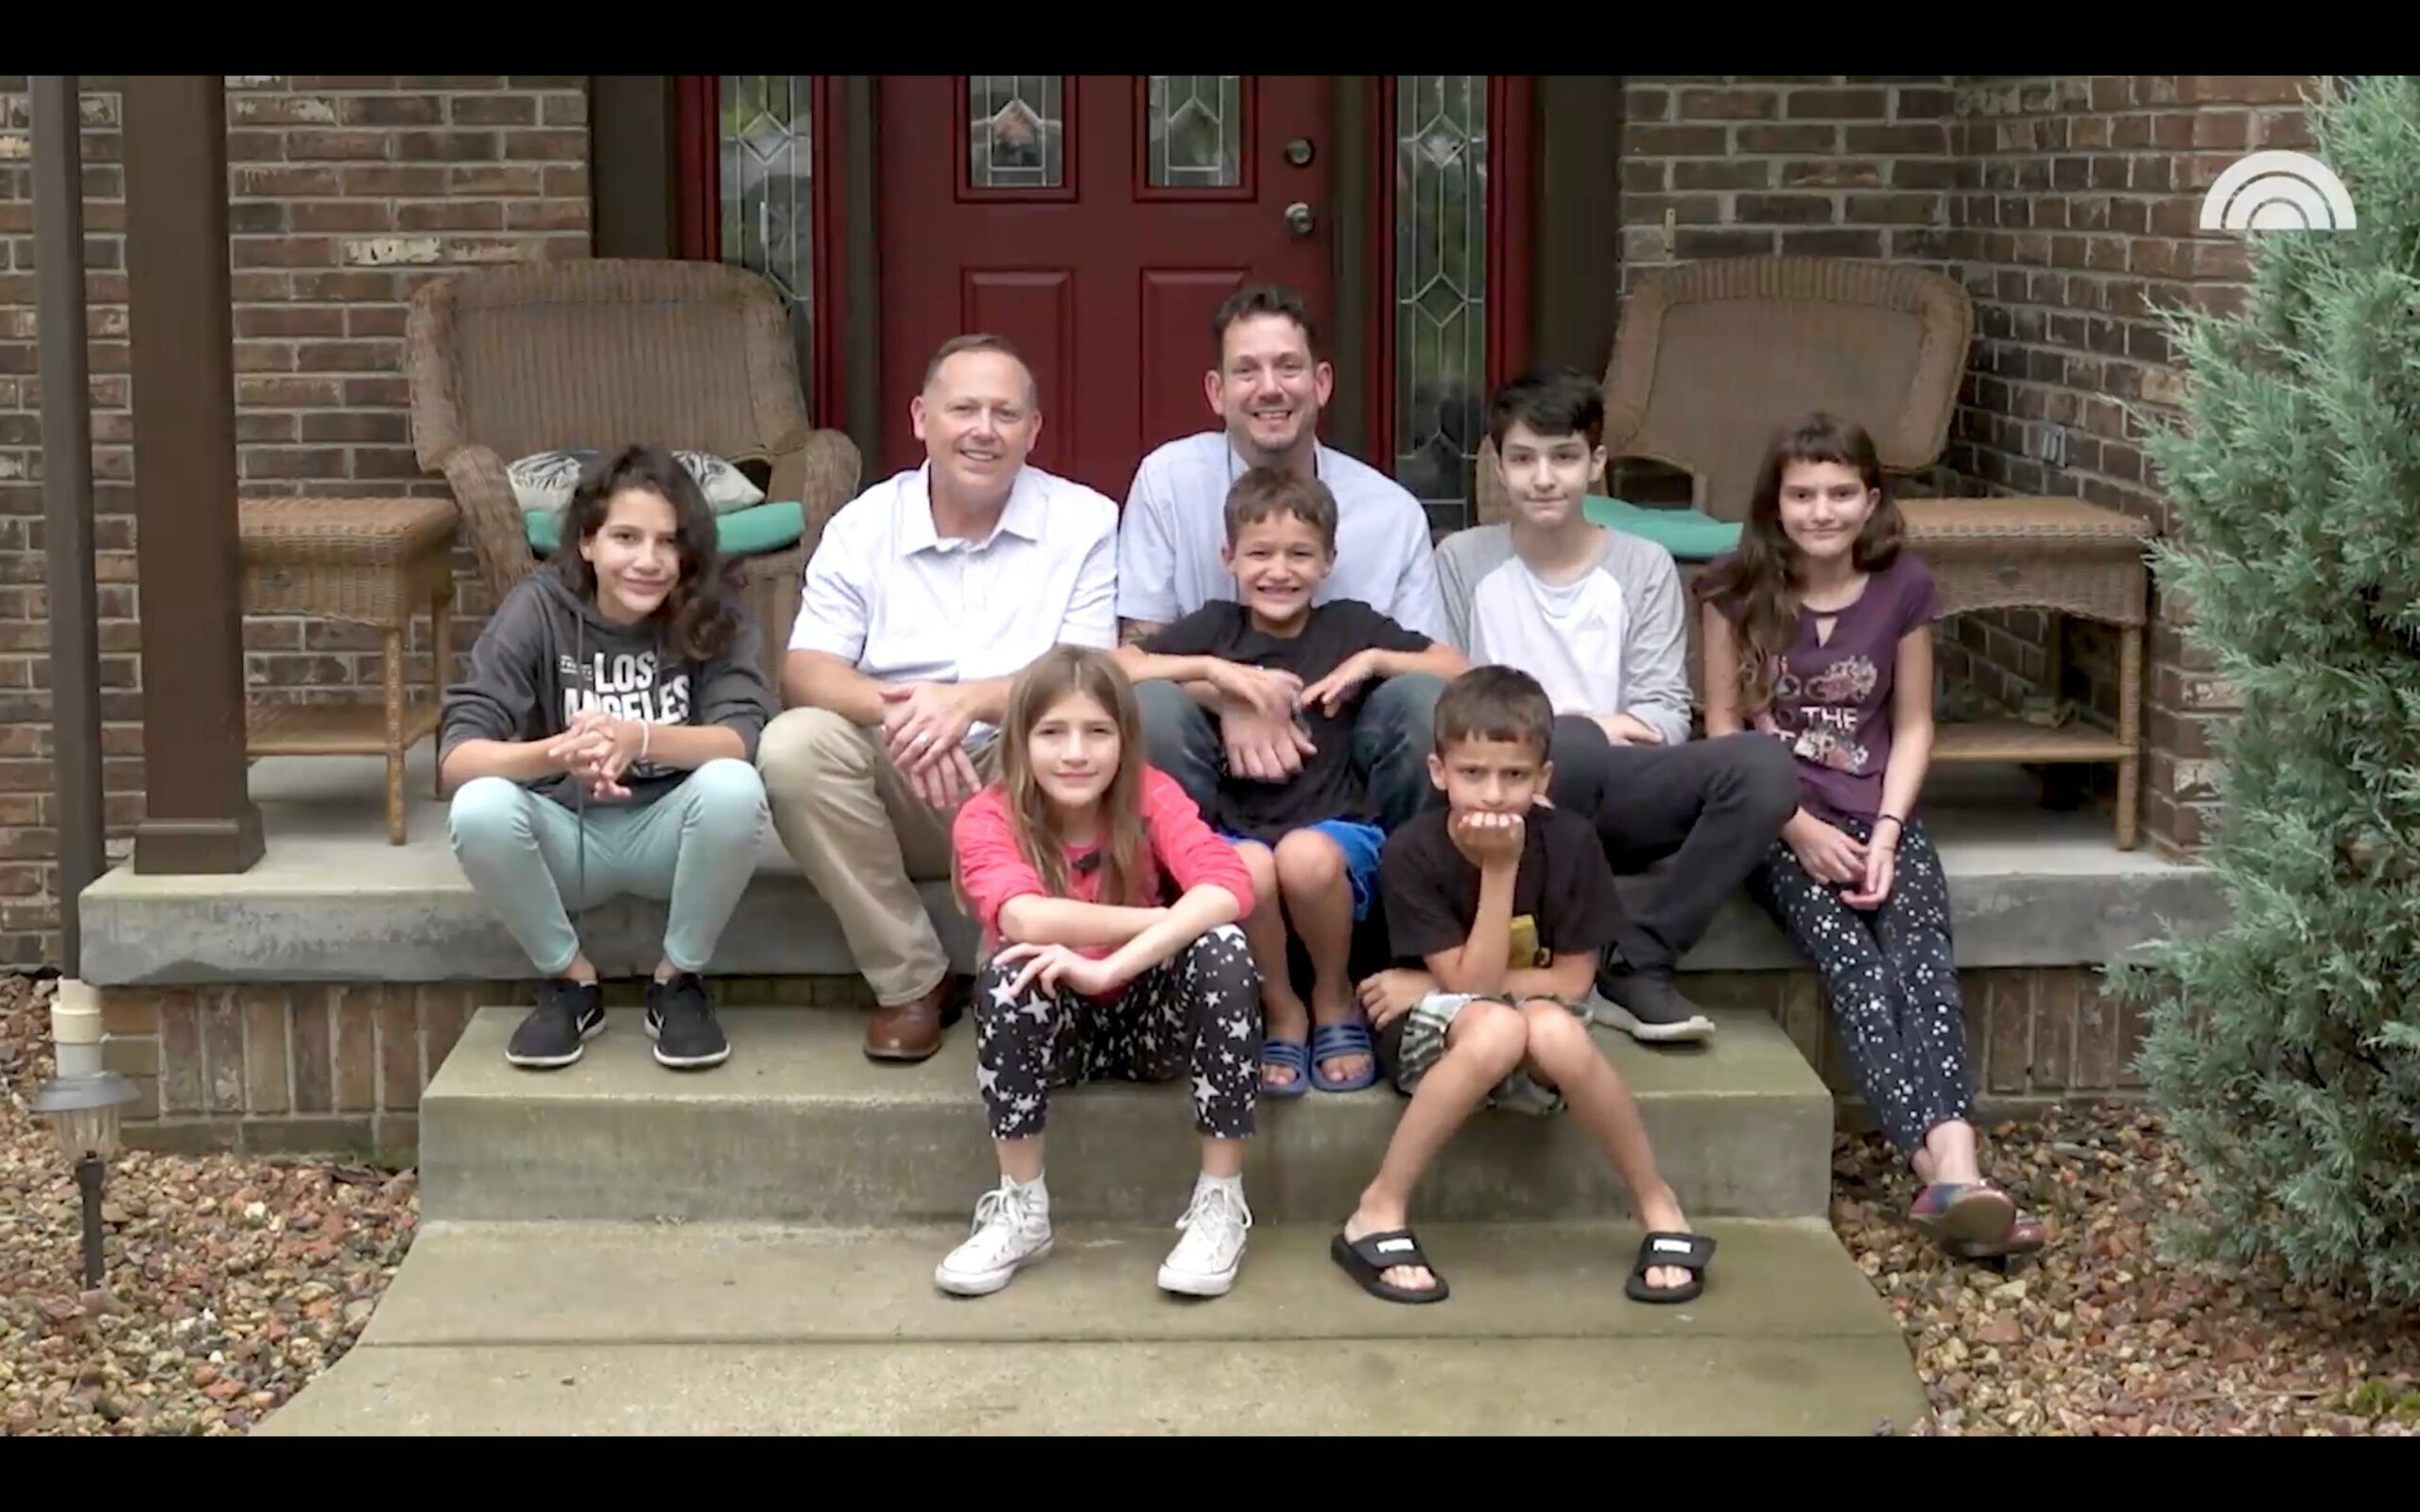 Steve and Rob Anderson-McLean celebrate three years of being a family of eight after adopting 6 siblings